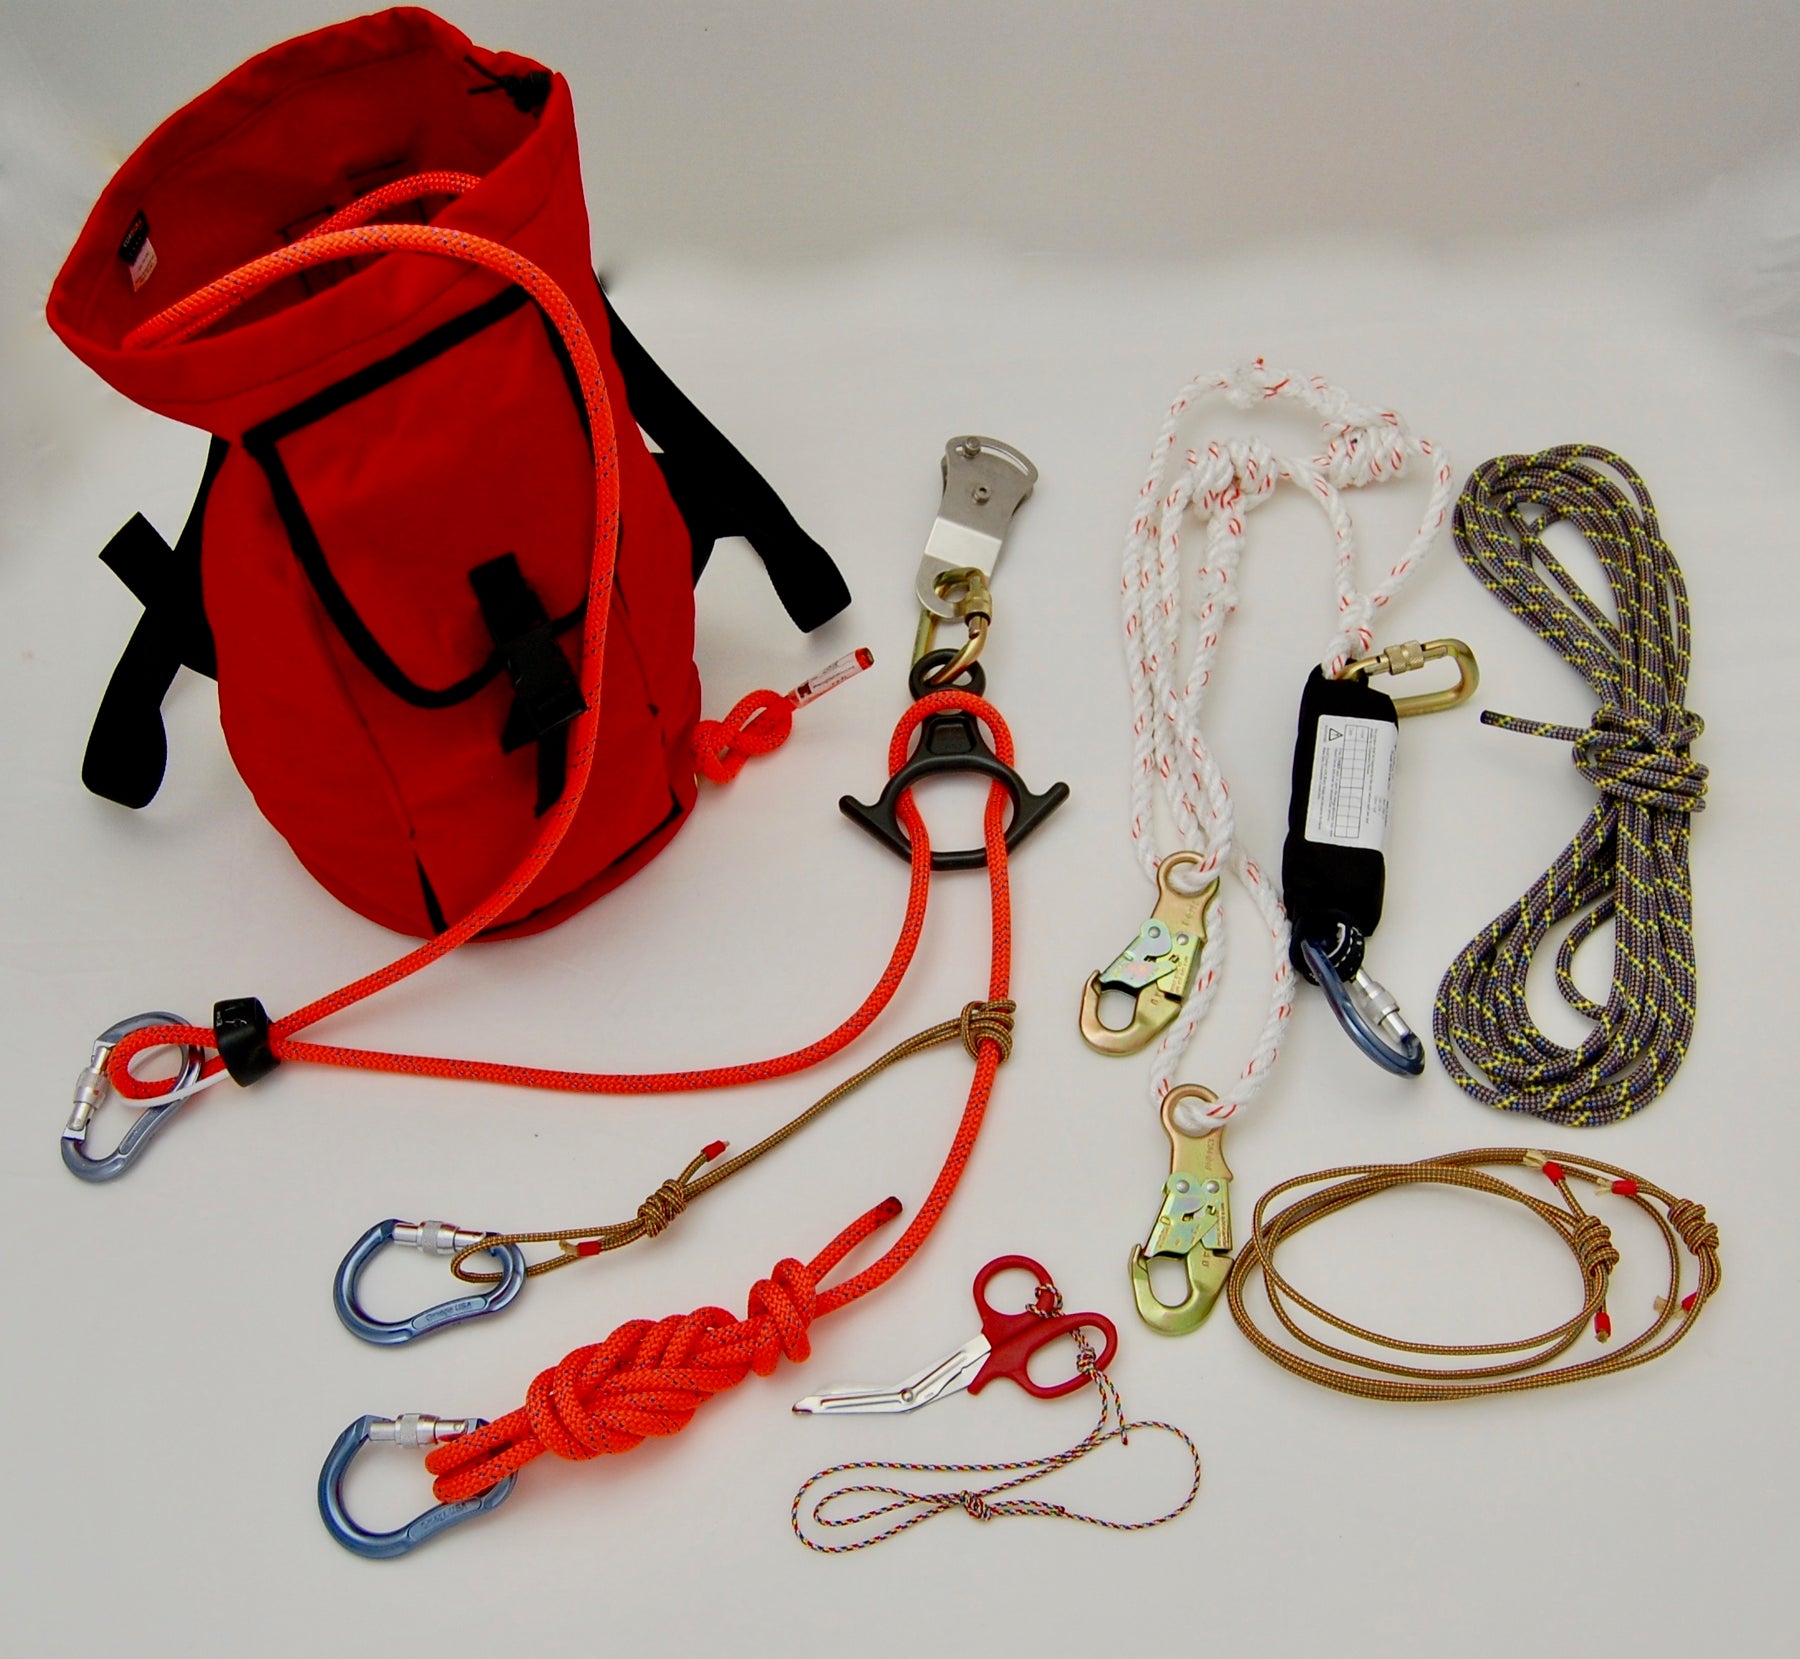 High 5 Challenge Course Rescue Kit – High 5 Adventure Learning Center